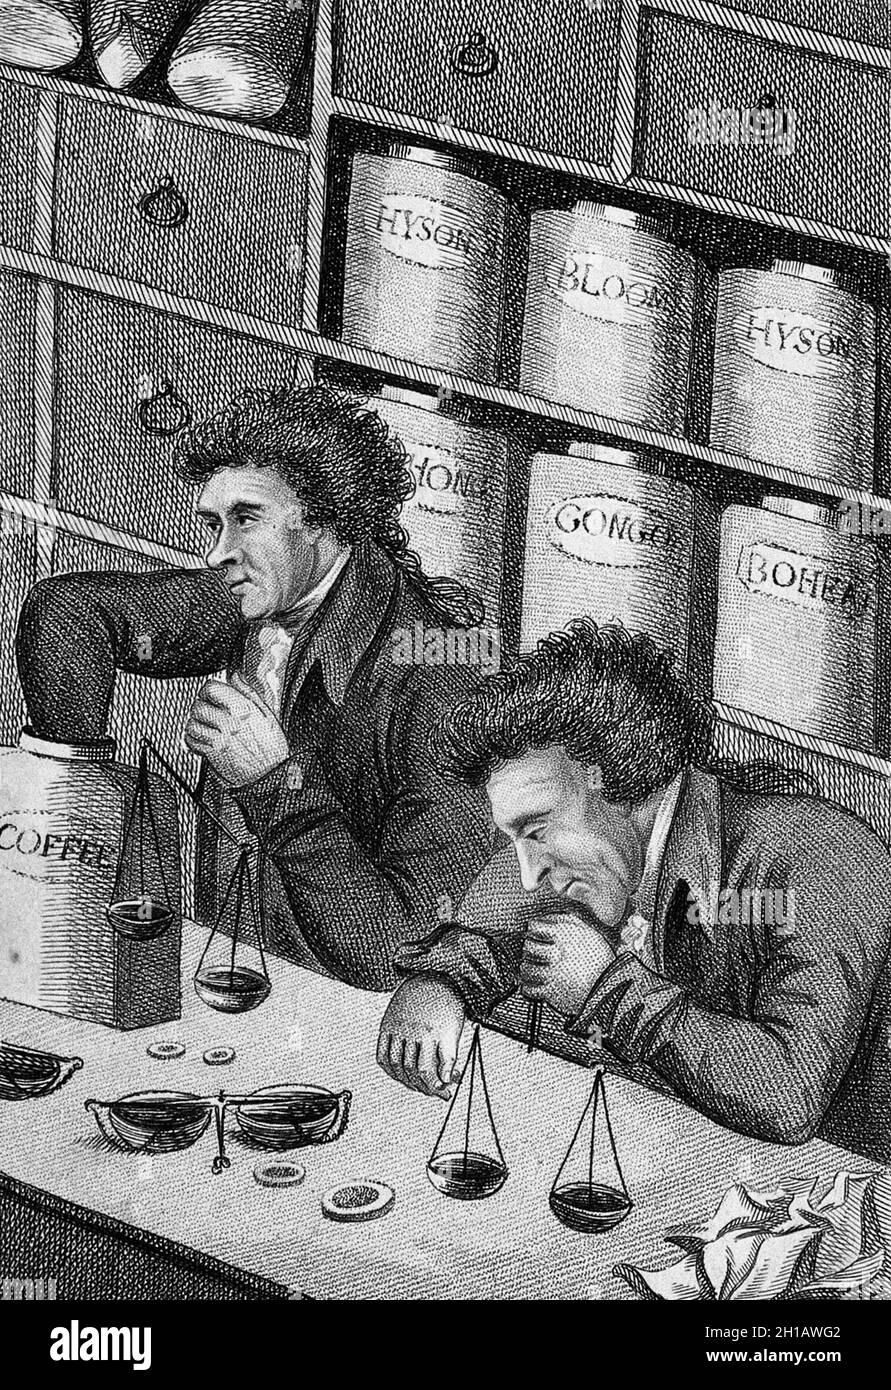 Engraving of two men at a shop counter in a tea and coffee retail shop using scales to measure out coffee beans, circa 1805 Stock Photo